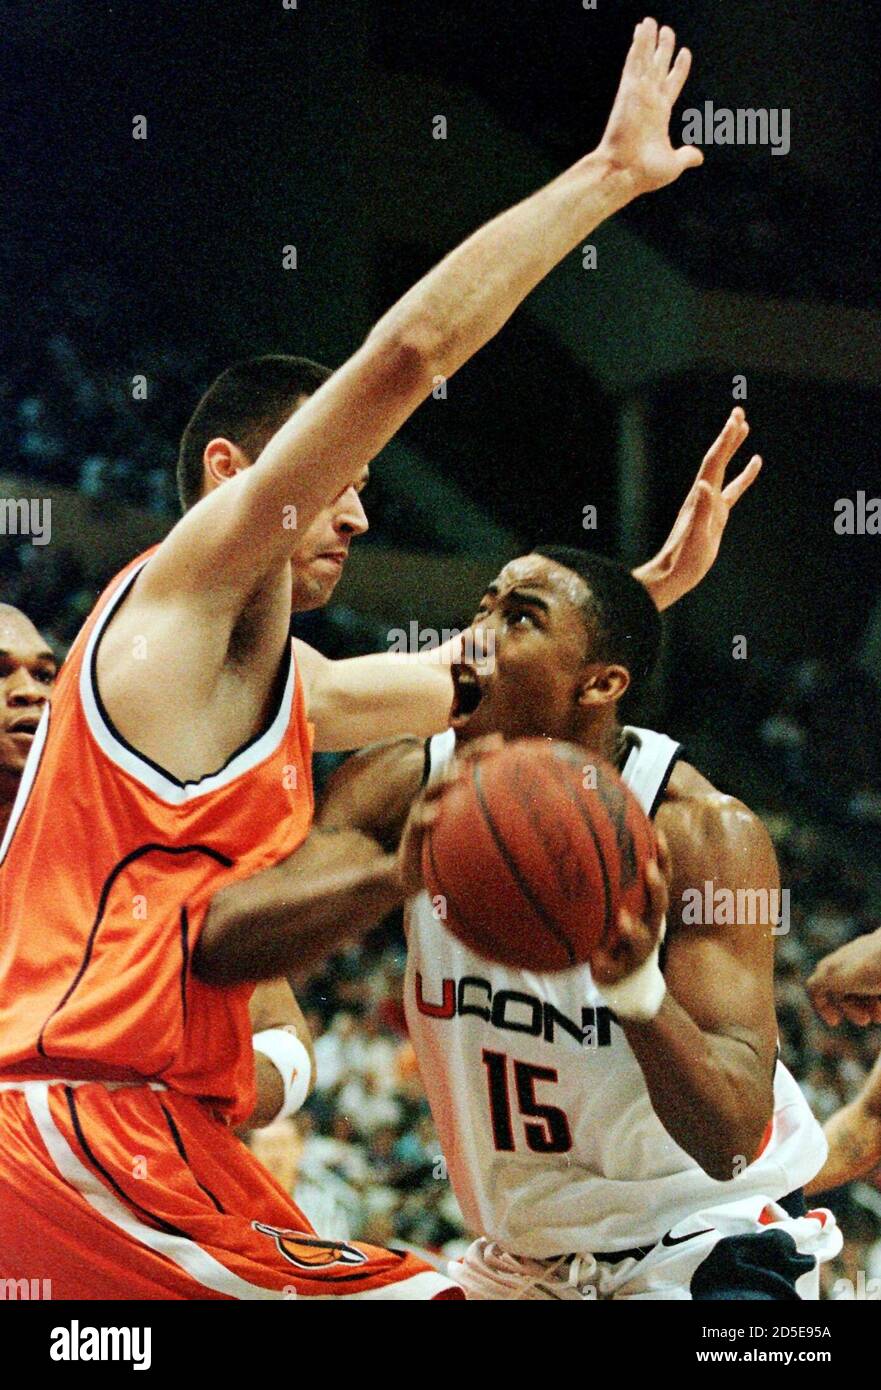 Kevin Freeman (R), one of the top season scoring leaders for the nationally  top-ranked University of Connecticut Huskies, finds himself shut down in  the lane by Elvir Ovcina (L) of the Syracuse